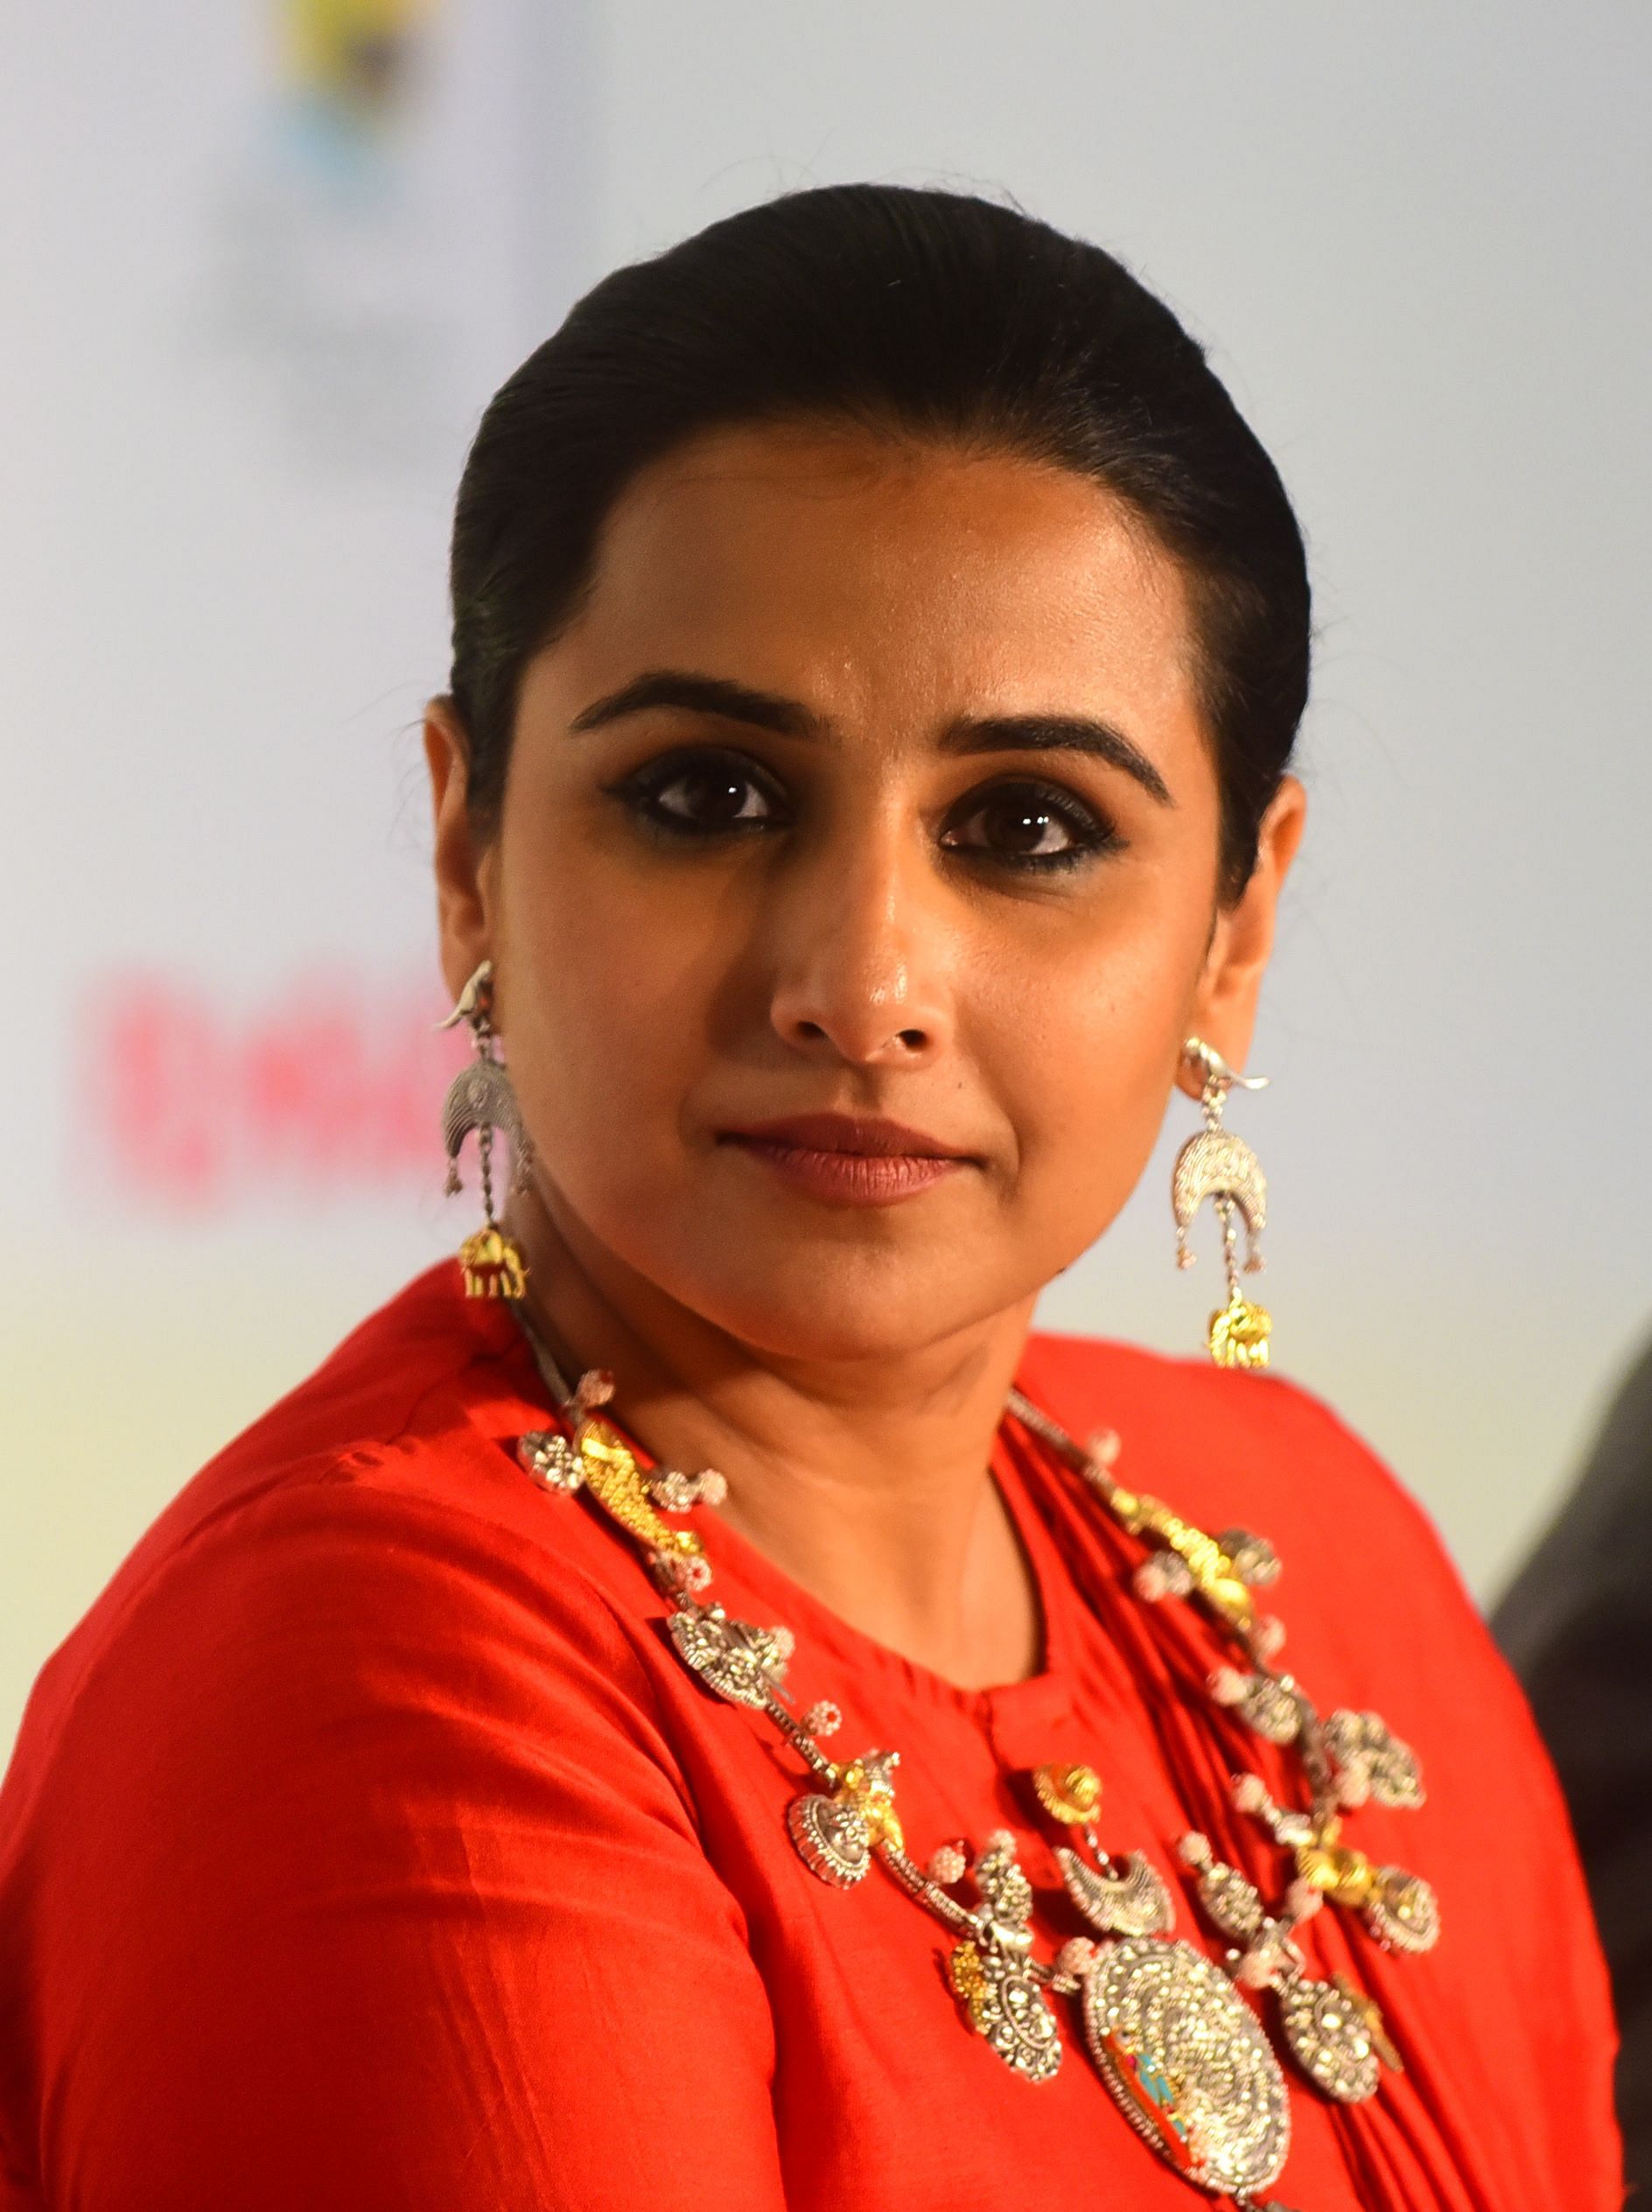 For donations made through Tring, Vidya will be recognising the support of every donor by sending a personal thank you video message, and a chance for a two-minute video call with her. (Credit: AFP Photo)